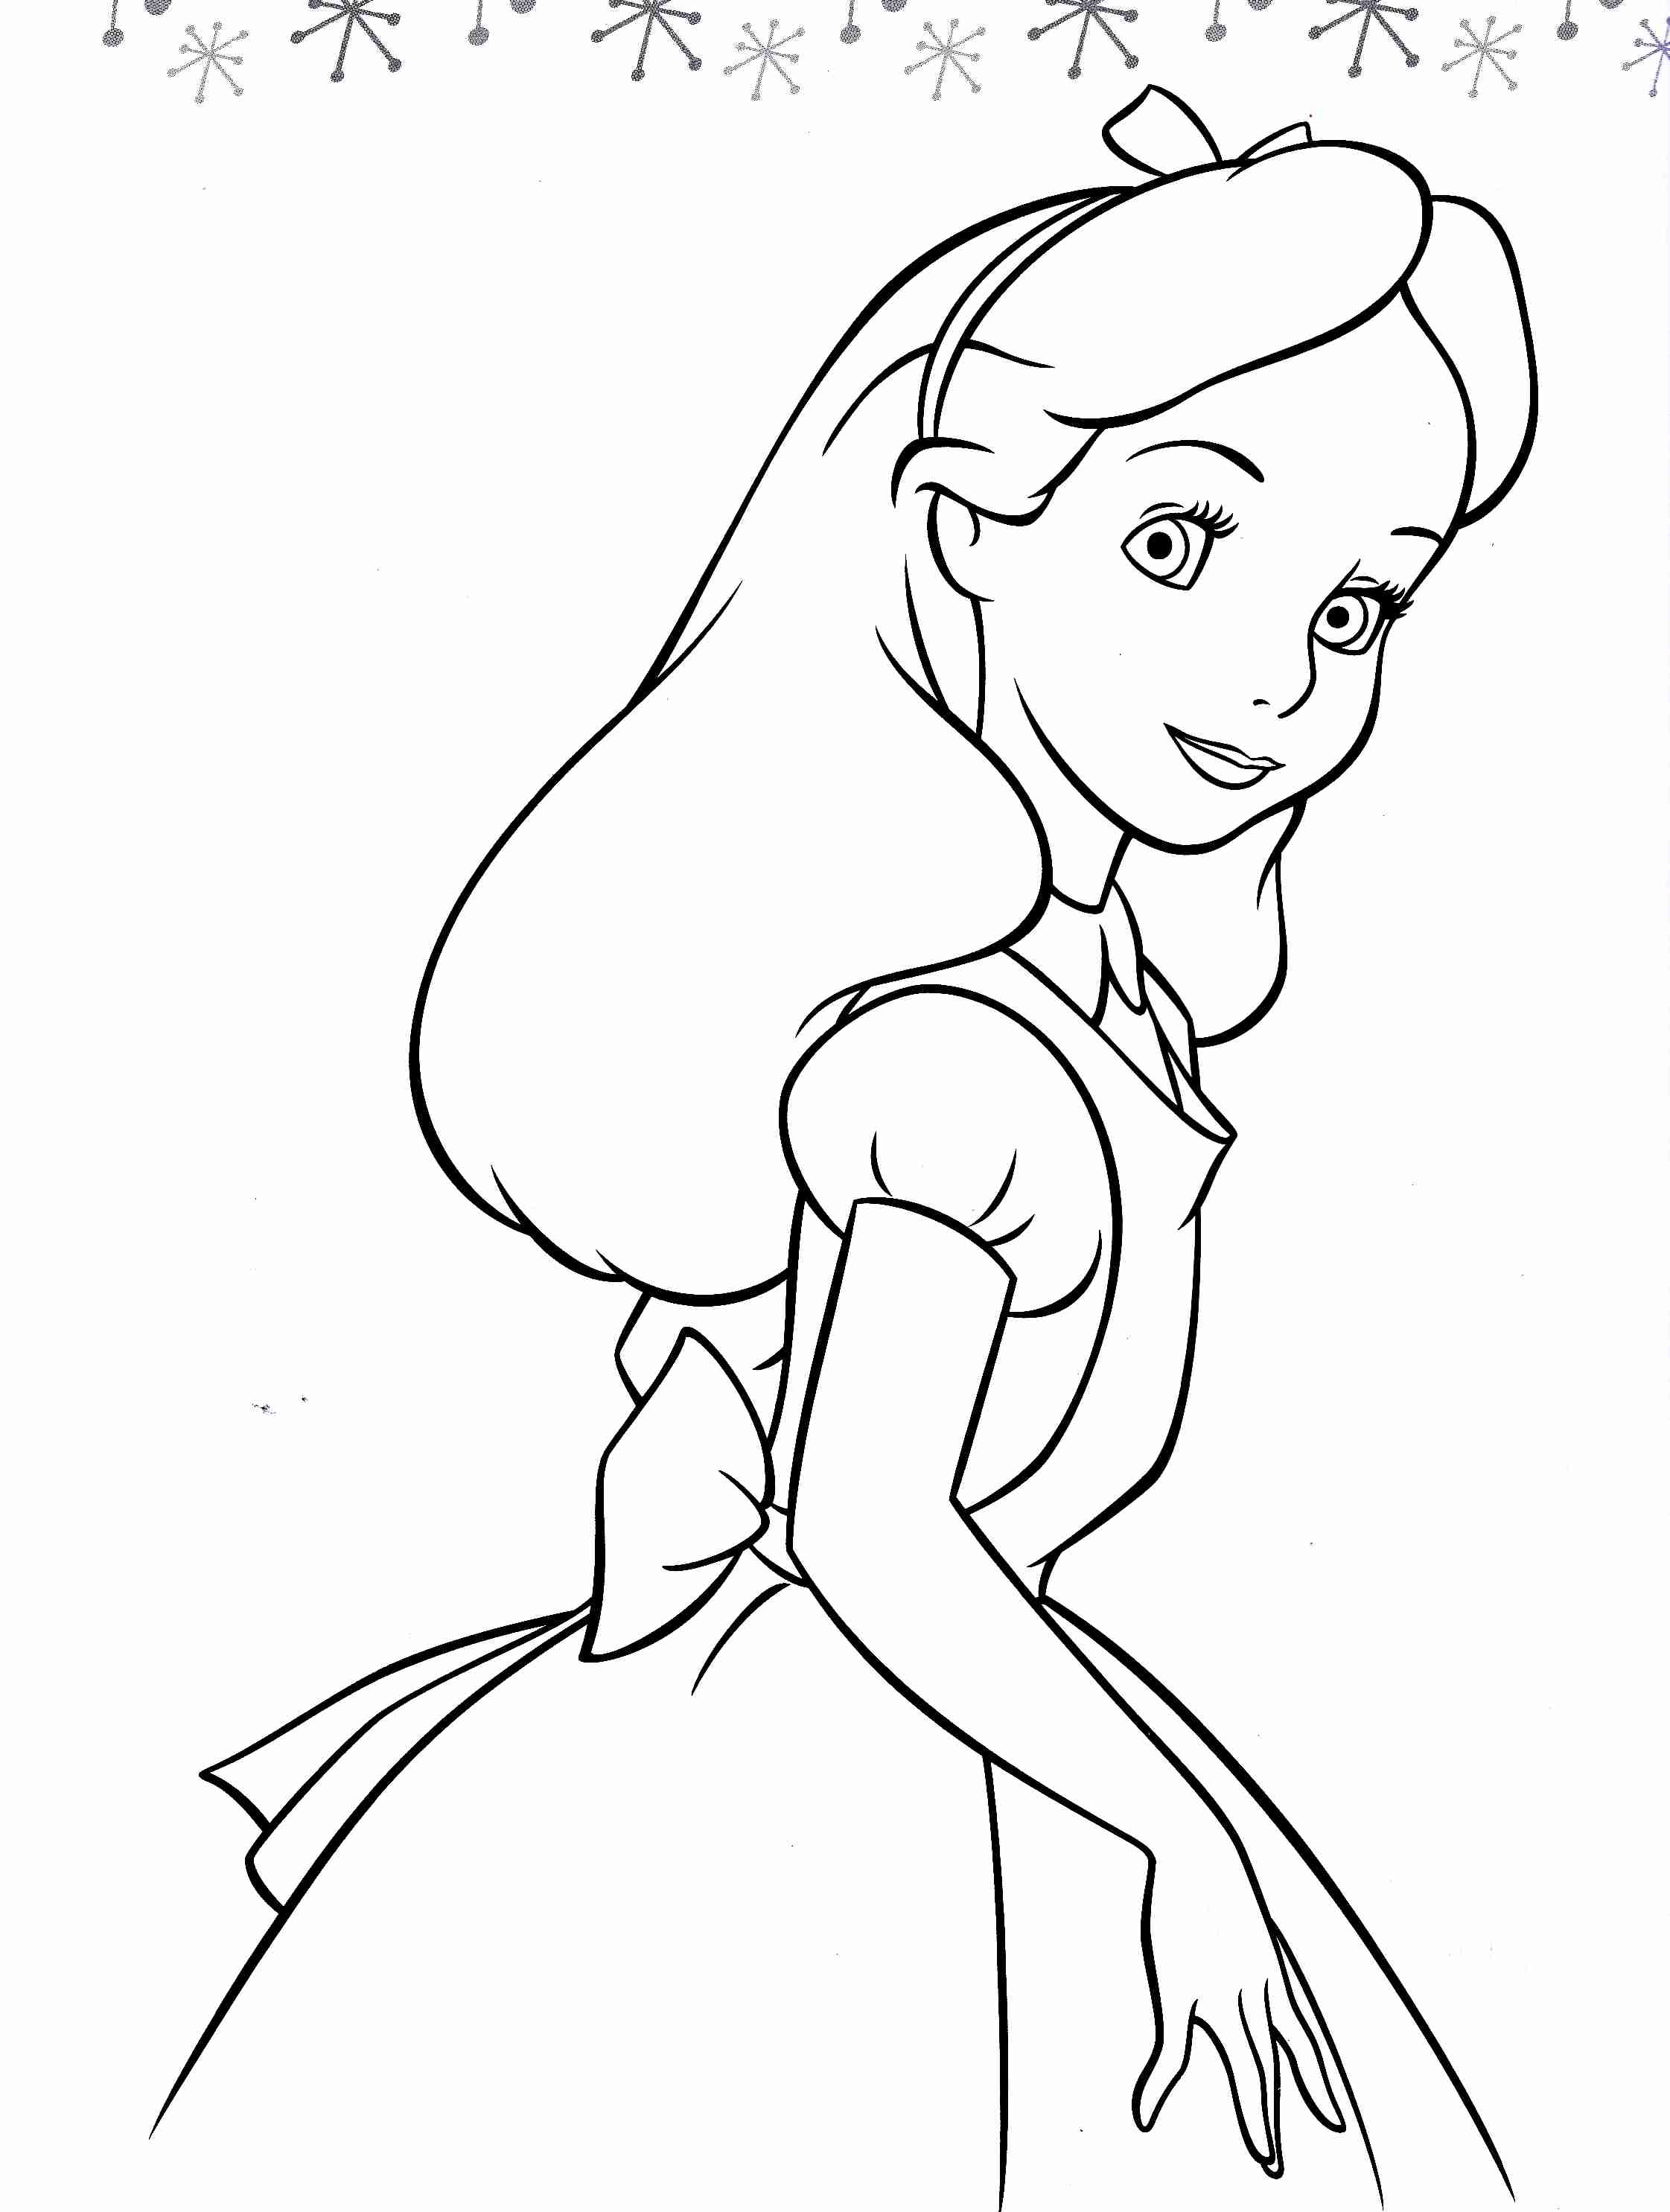 Coloring Pages Of Alice In Wonderland Characters at GetColorings.com